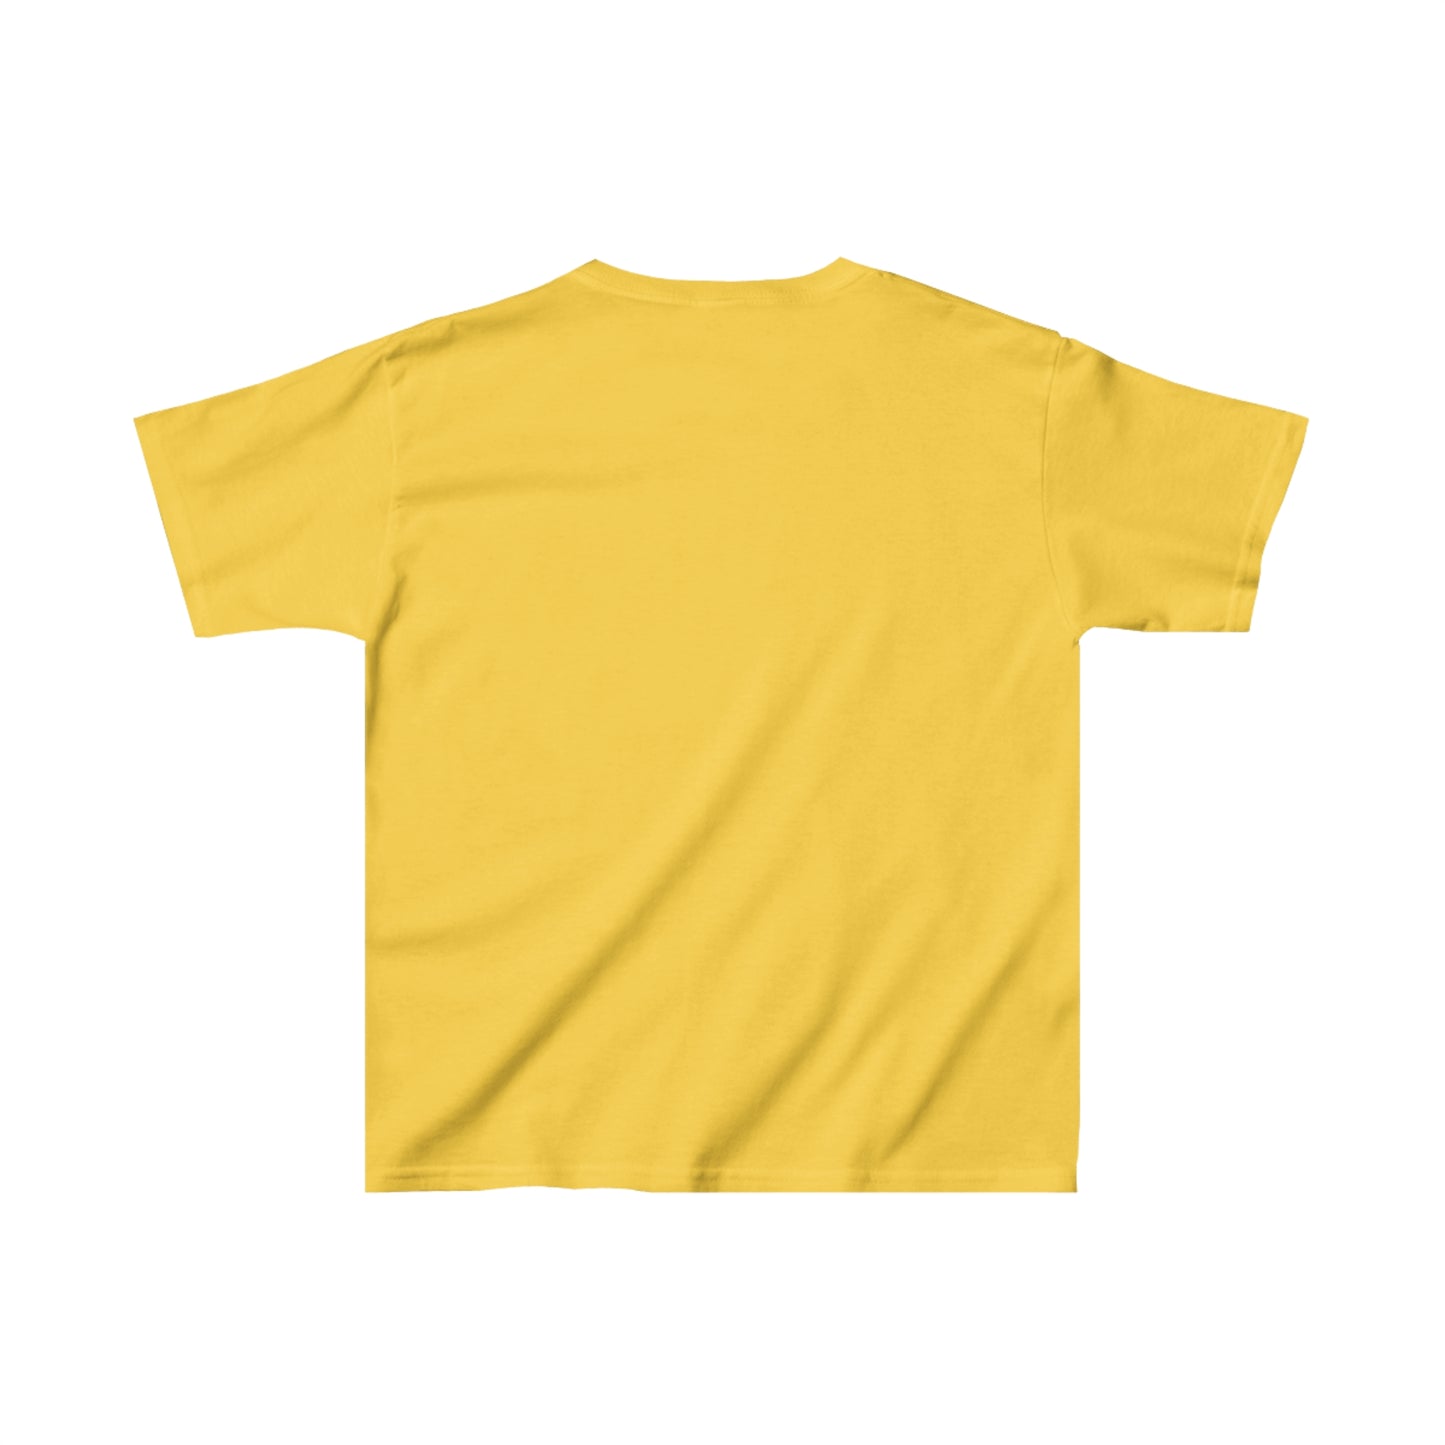 To Do List. Finished. Kids Heavy Cotton™ Tee